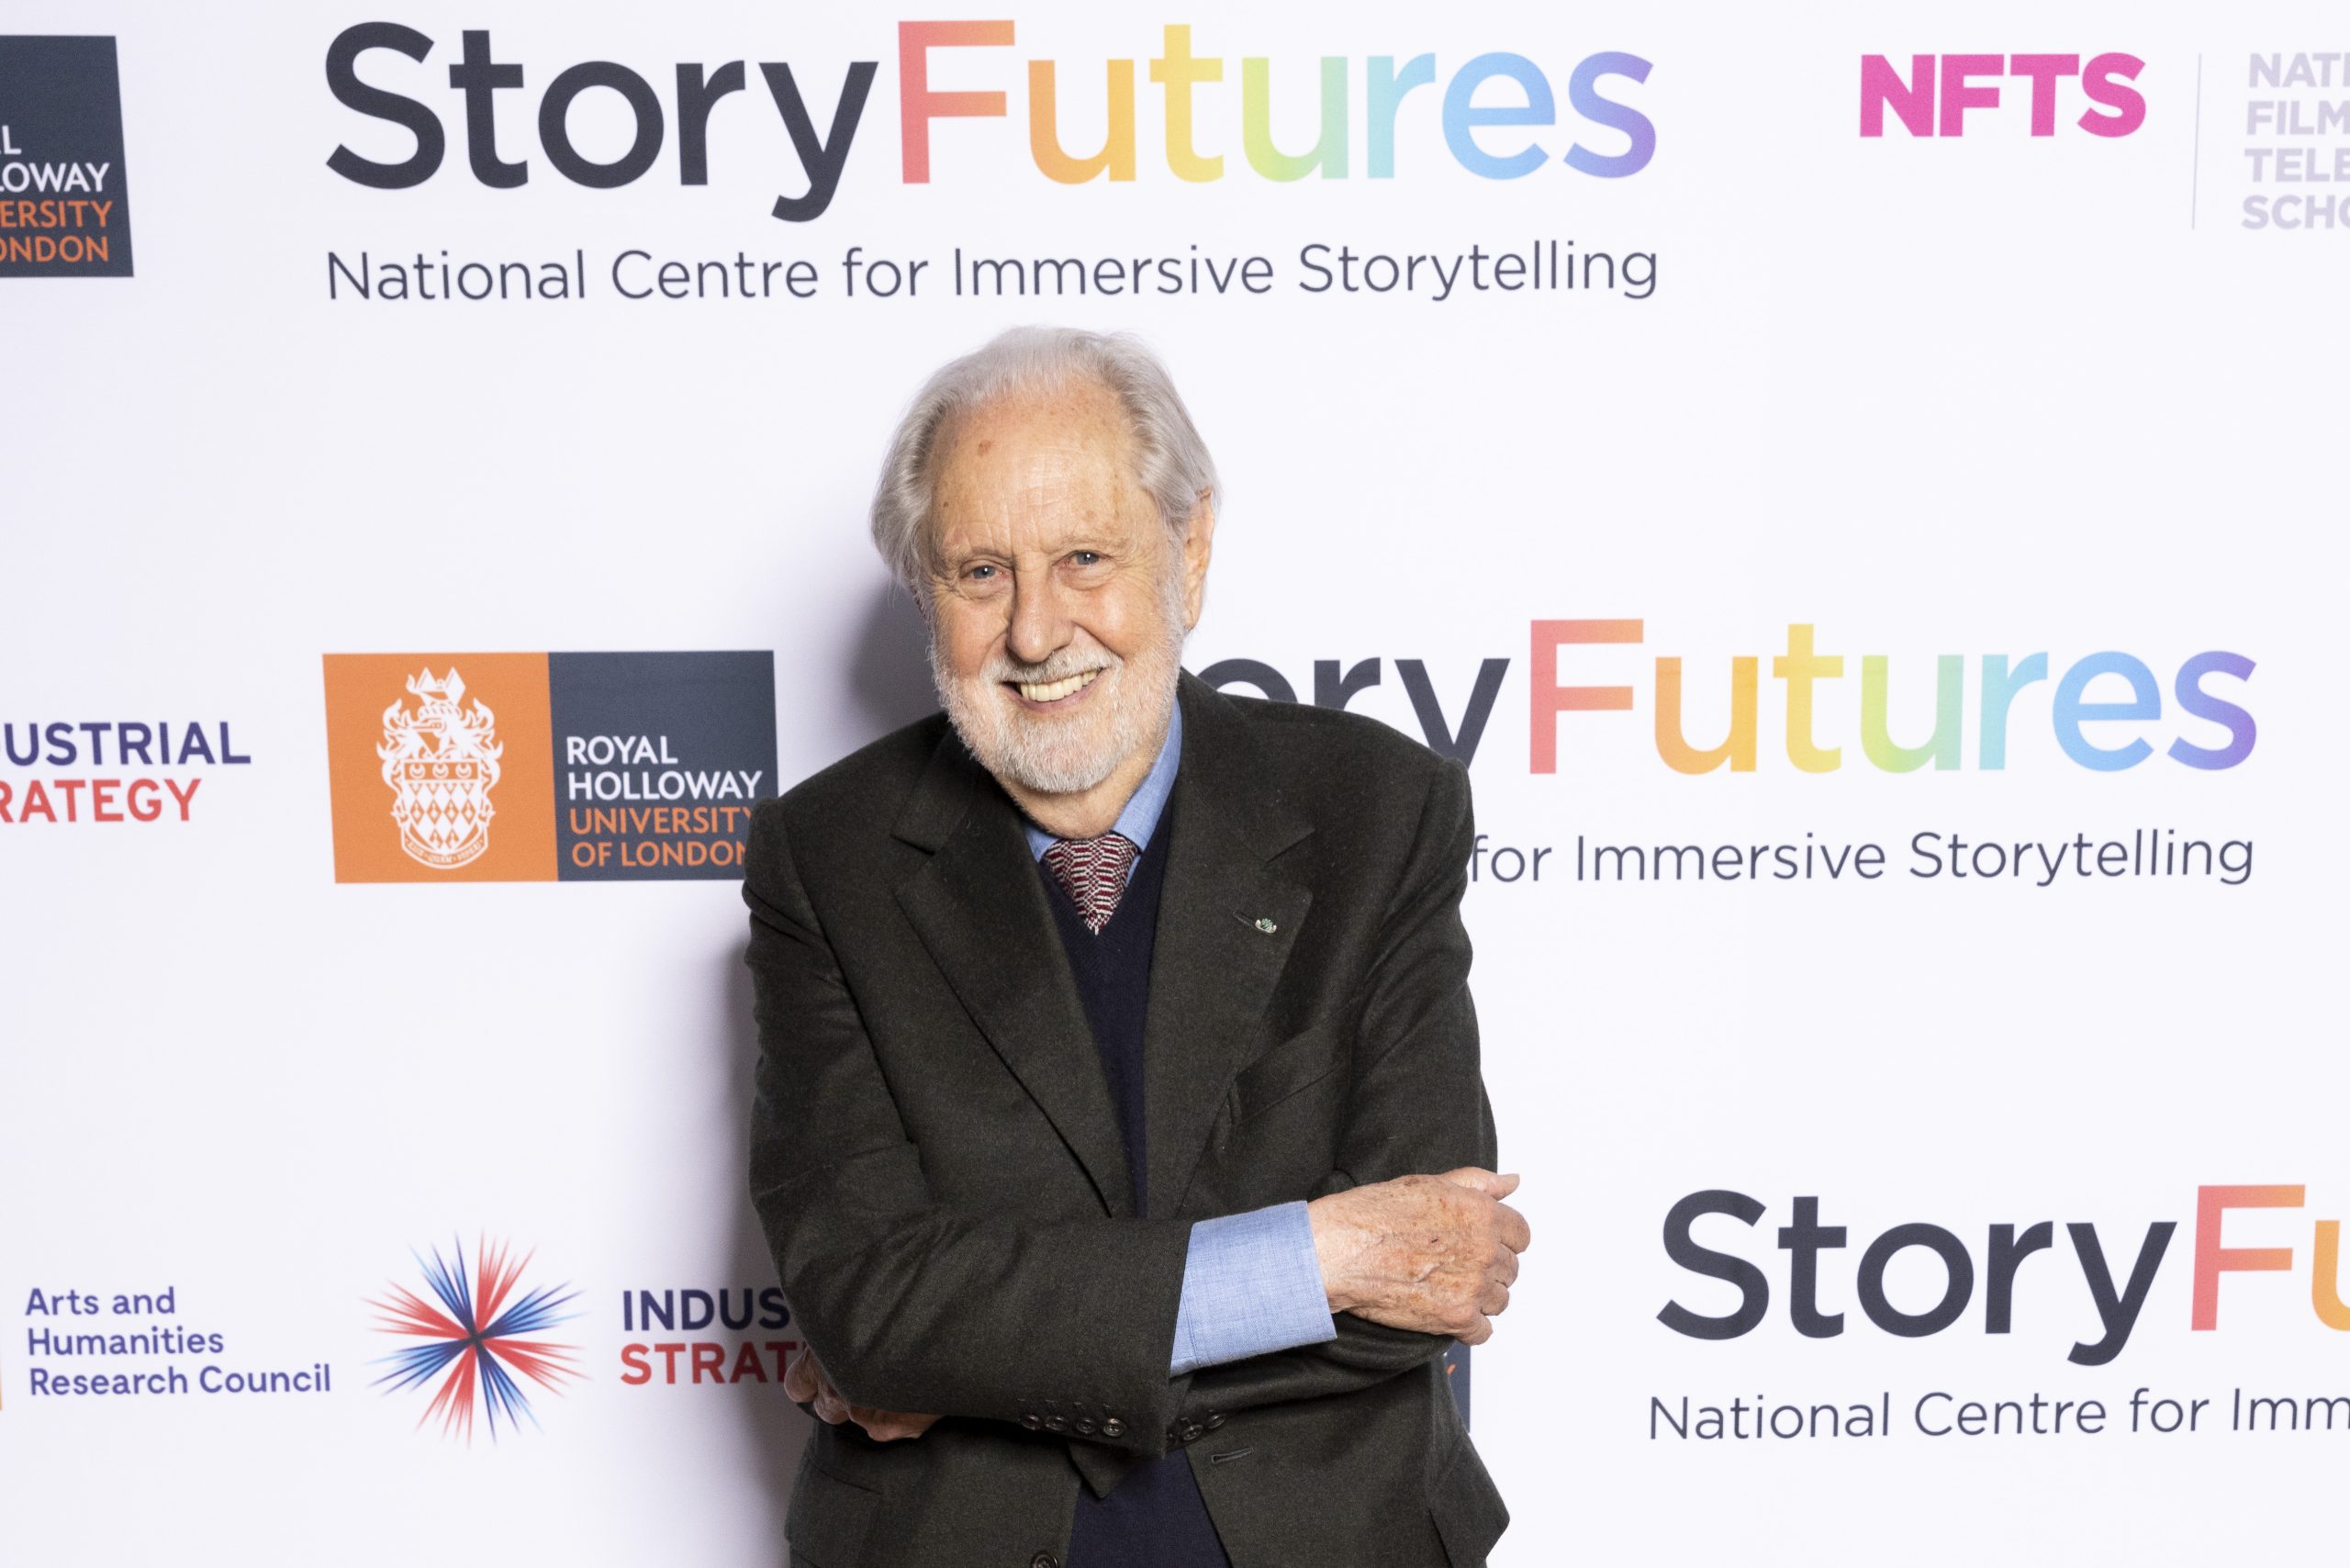 Lord David Puttnam photographed at an event with NFTS and StoryFutures